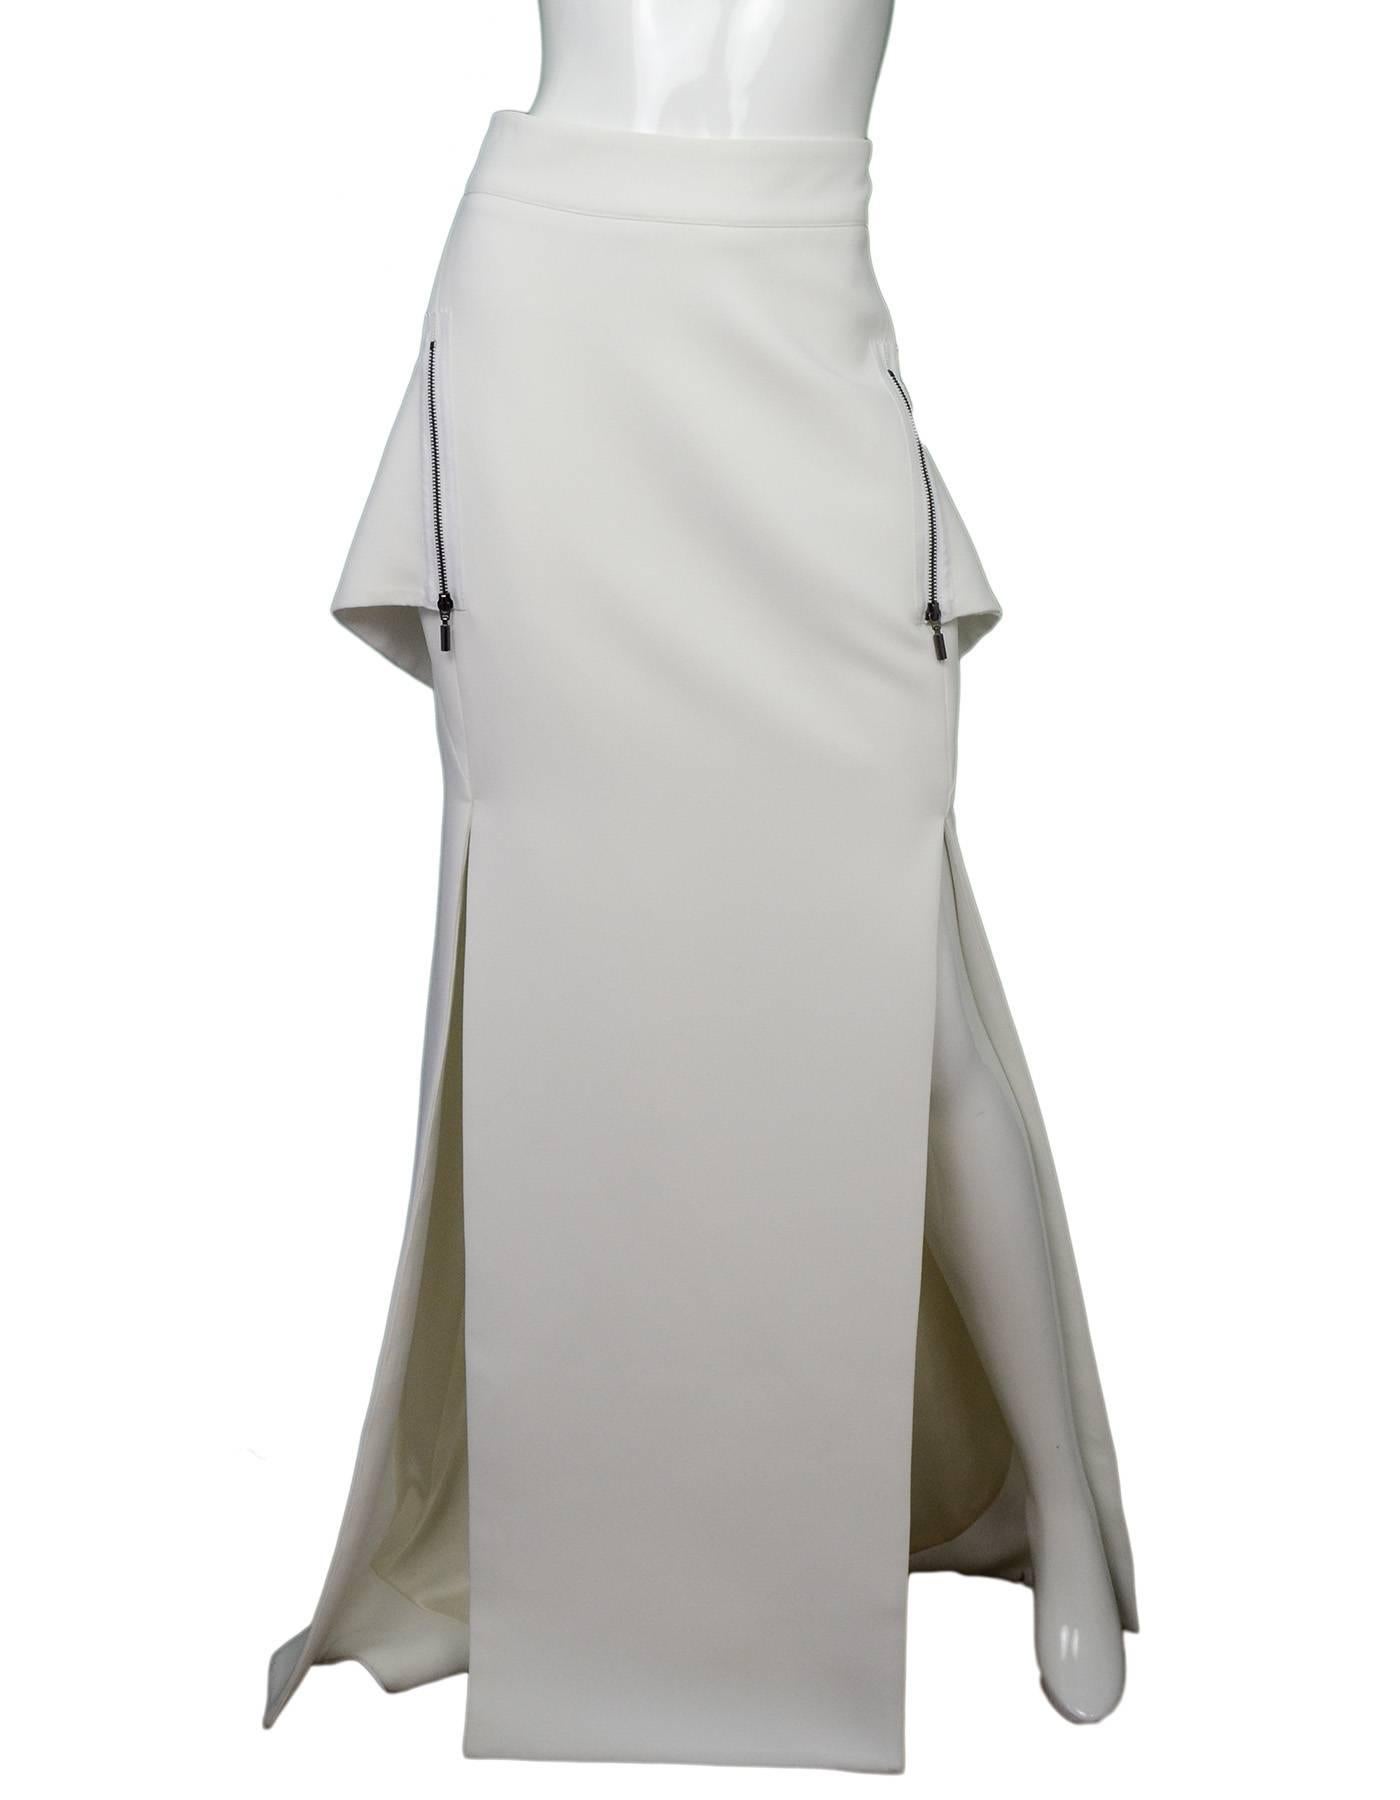 Maticevski White Aventure Long Line Skirt Sz 10 NWT

Made In: Australia
Color: White
Composition: 100% polyester
Lining: White silk
Closure/Opening: Exposed back zip closure
Exterior Pockets: None
Interior Pockets: None
Retail Price: $1,290 +